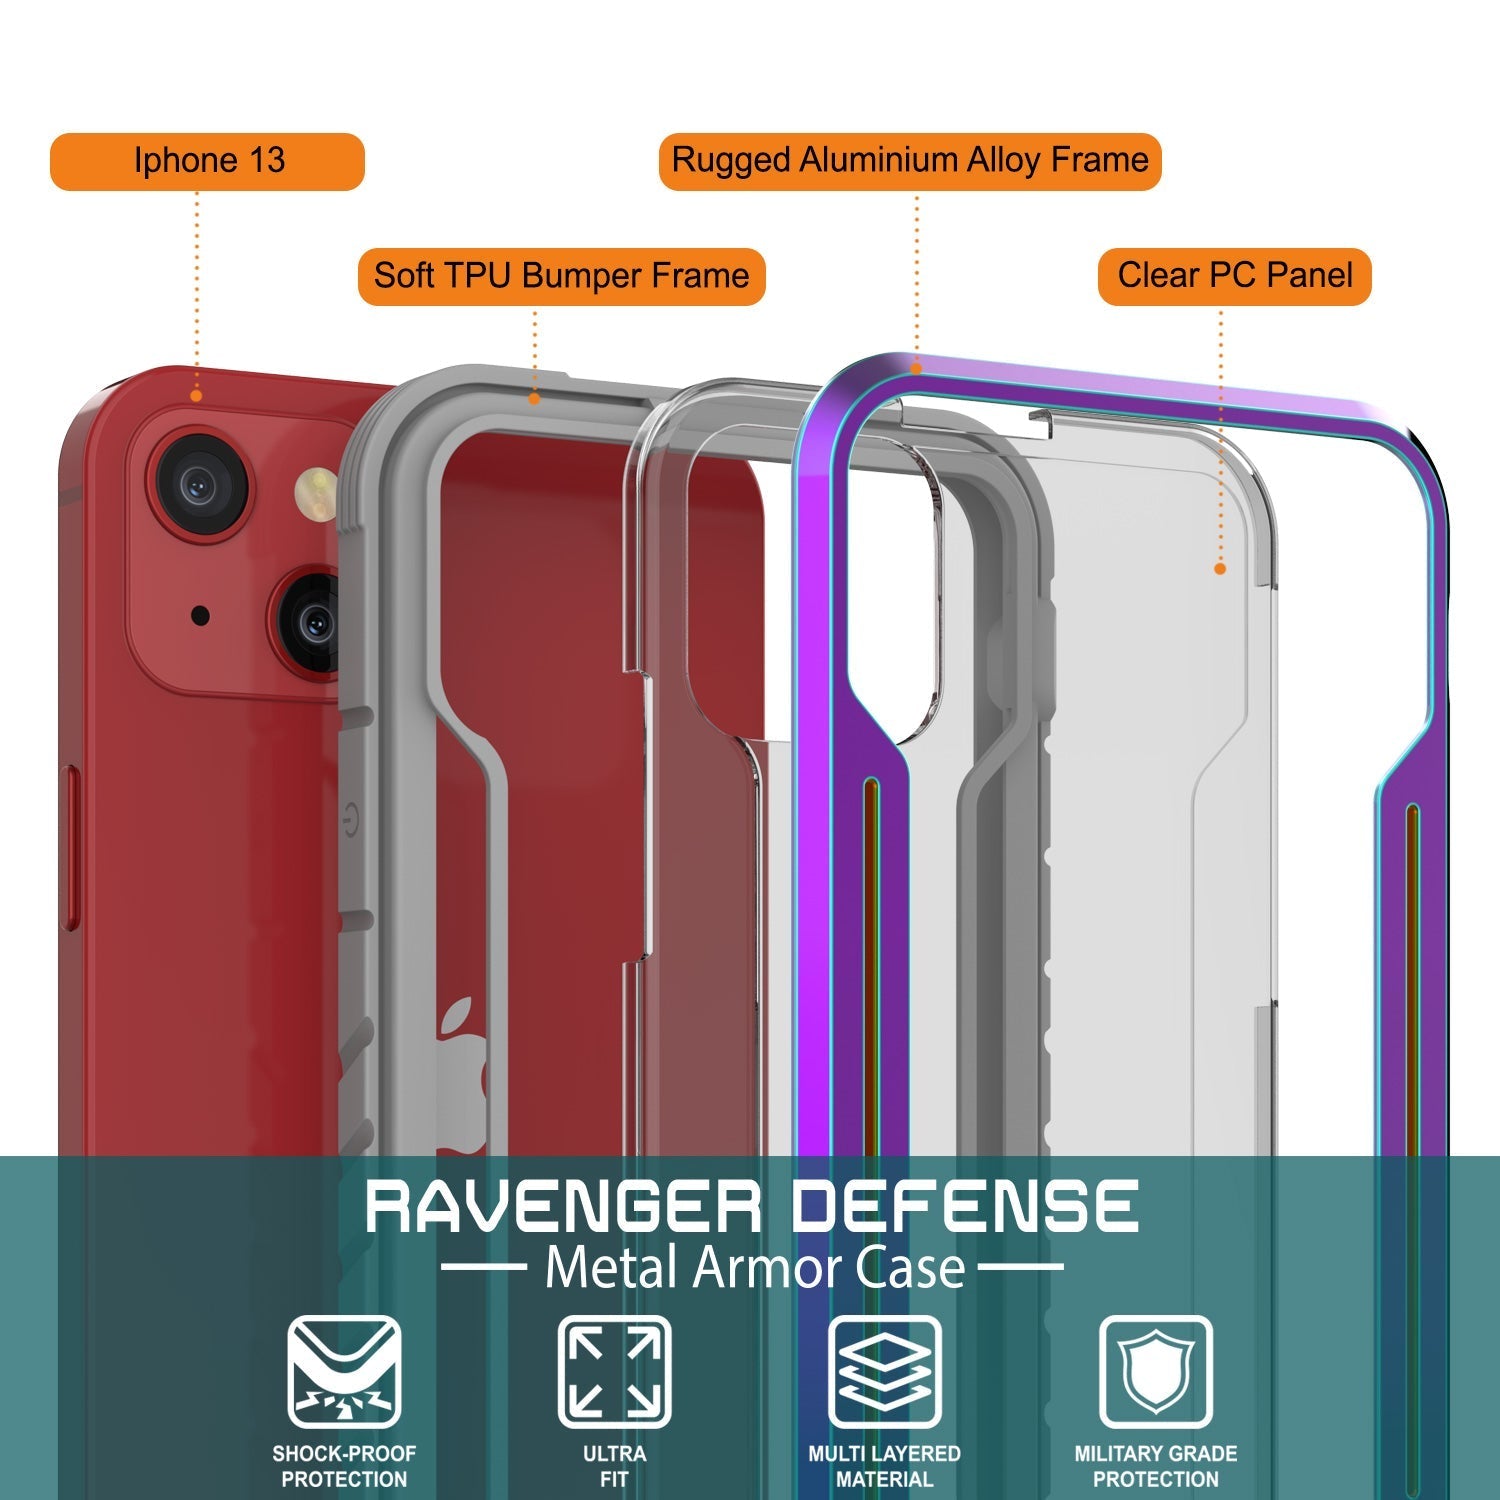 Punkcase iPhone 14 Ravenger MAG Defense Case Protective Military Grade Multilayer Cover [Rainbow]